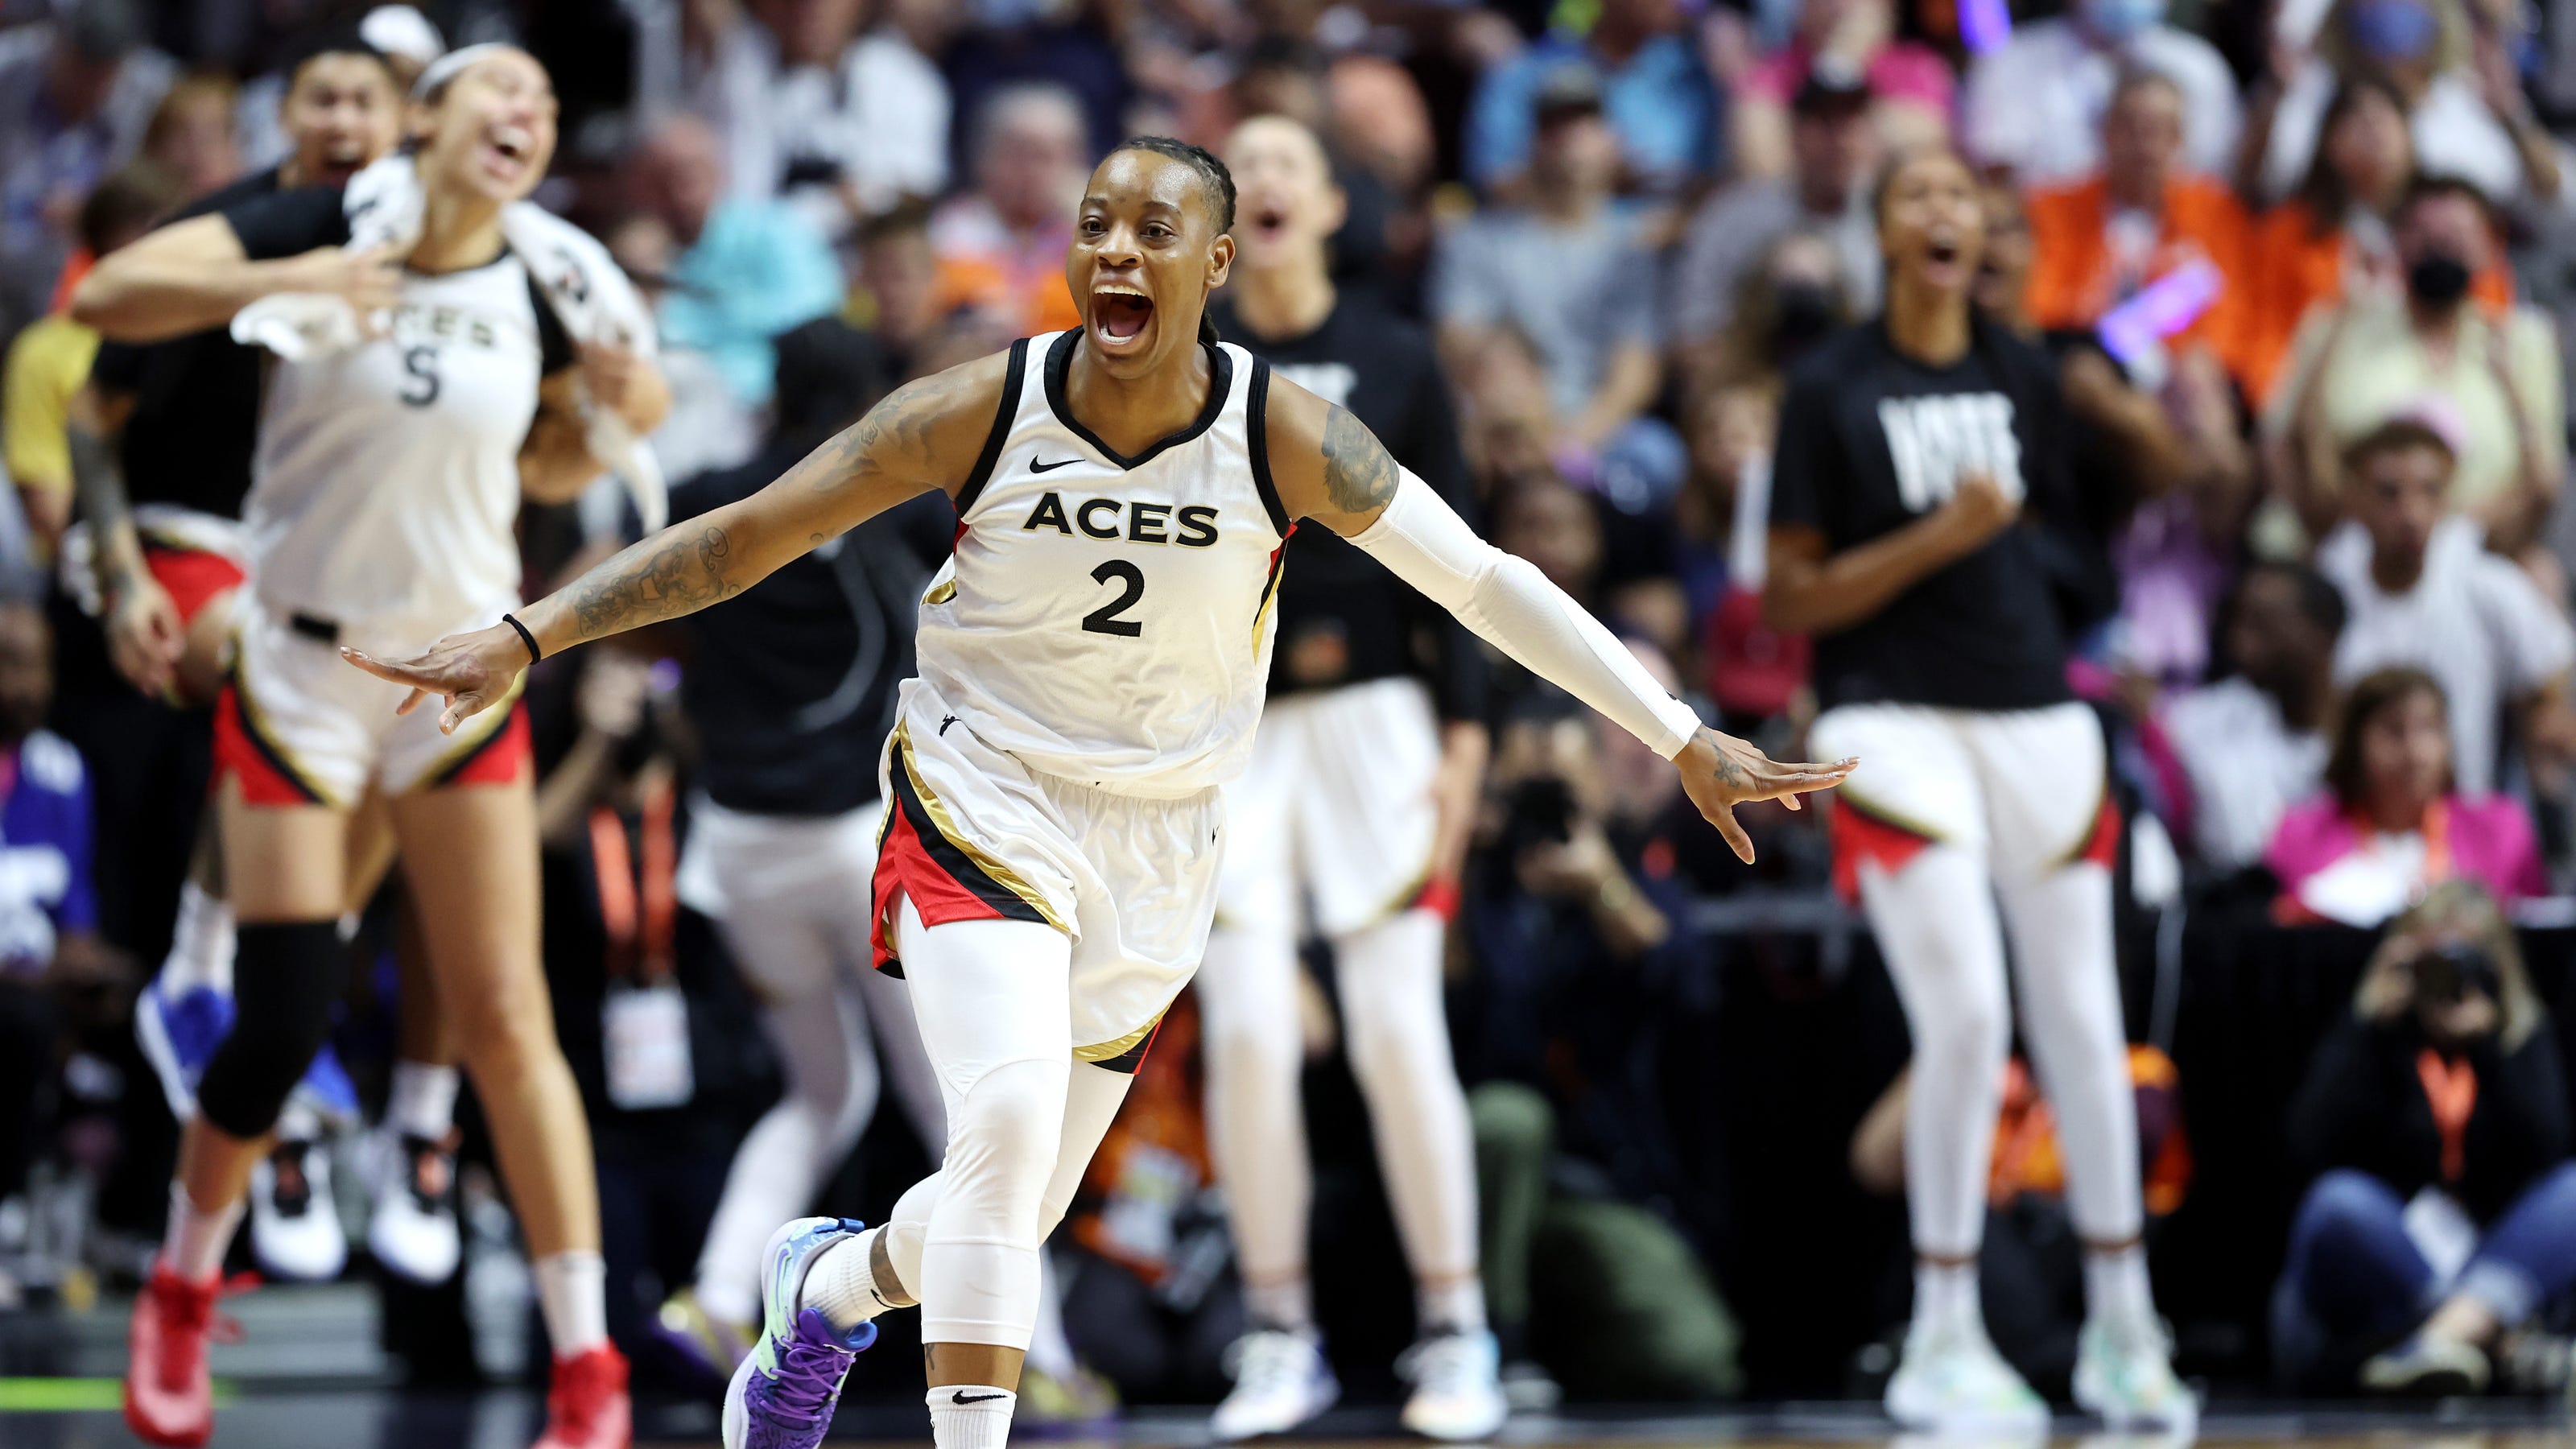 Coming up Aces! Las Vegas beats Connecticut  Sun to win first WNBA championship